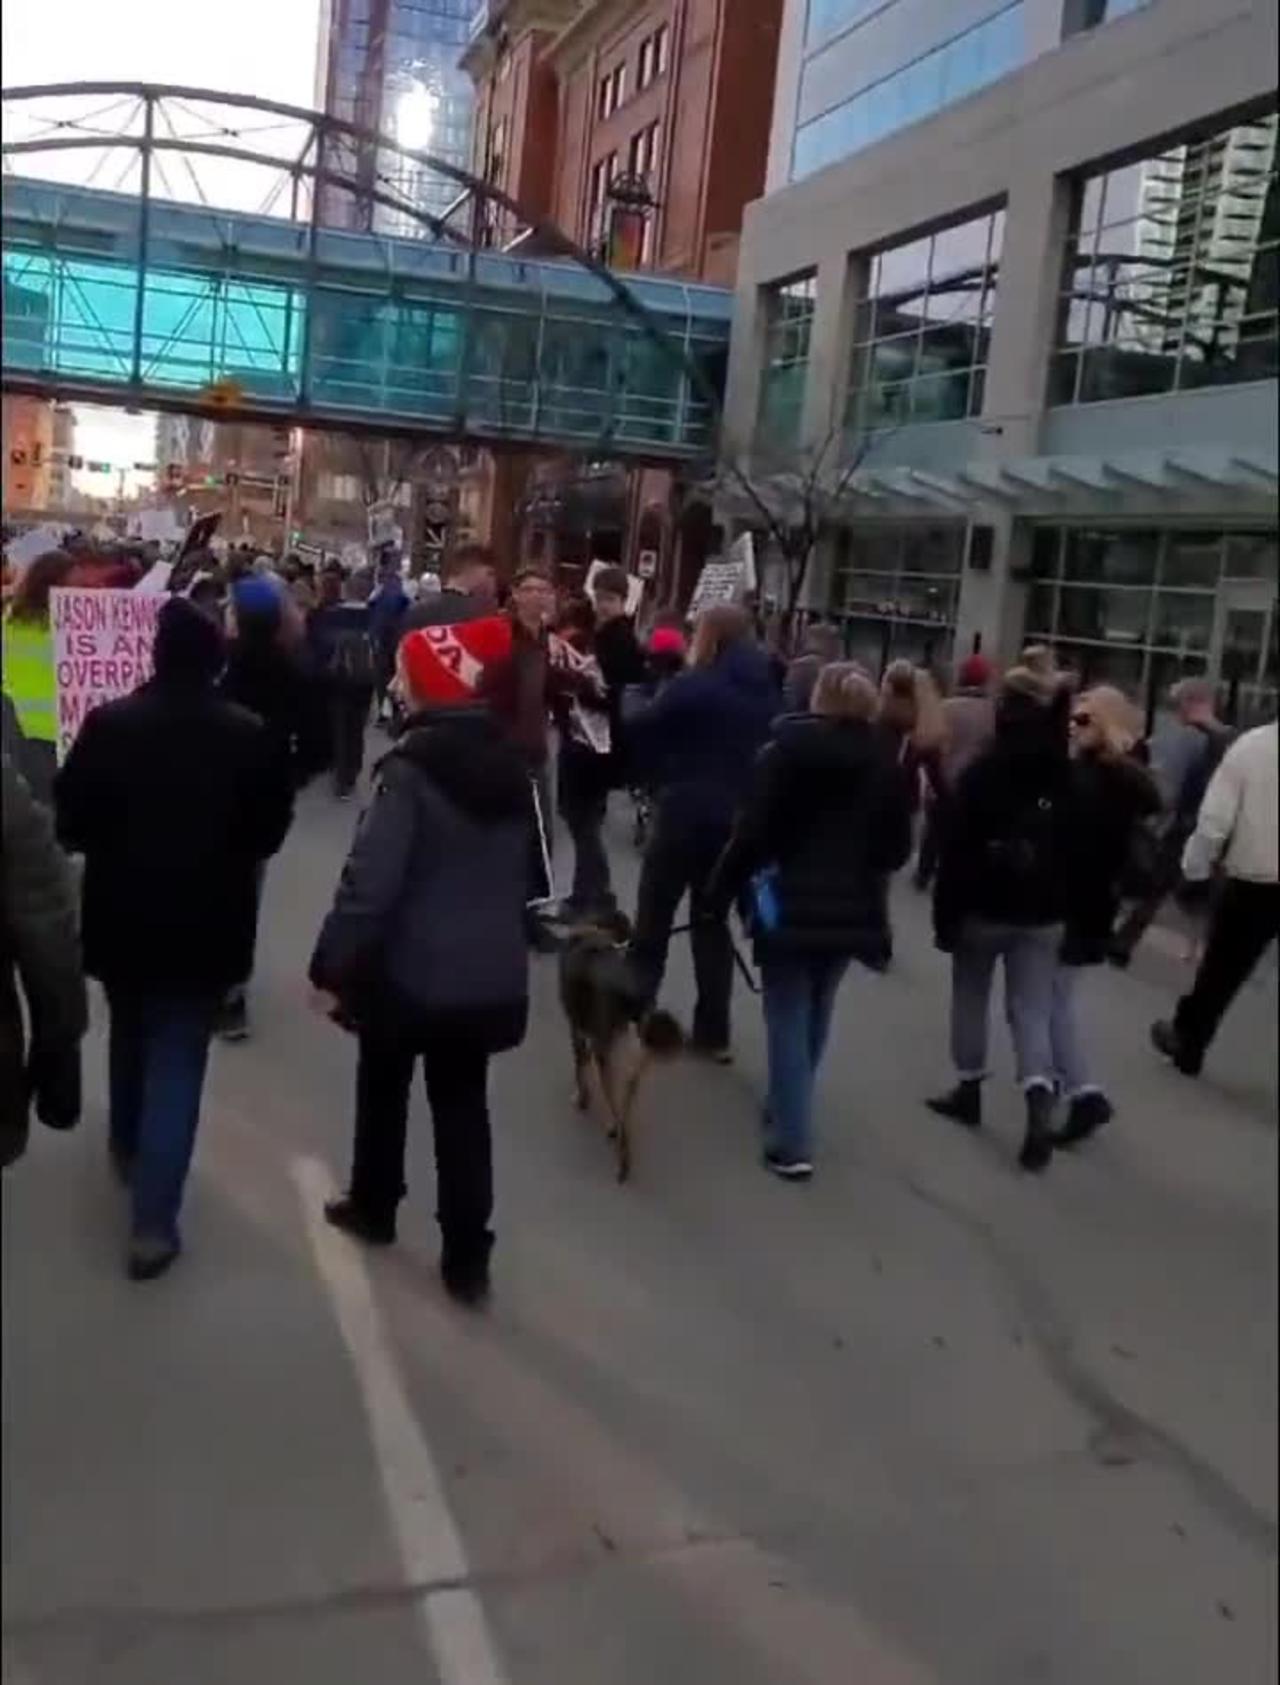 Calgary, Canada hits the streets against covid passports and mandates.